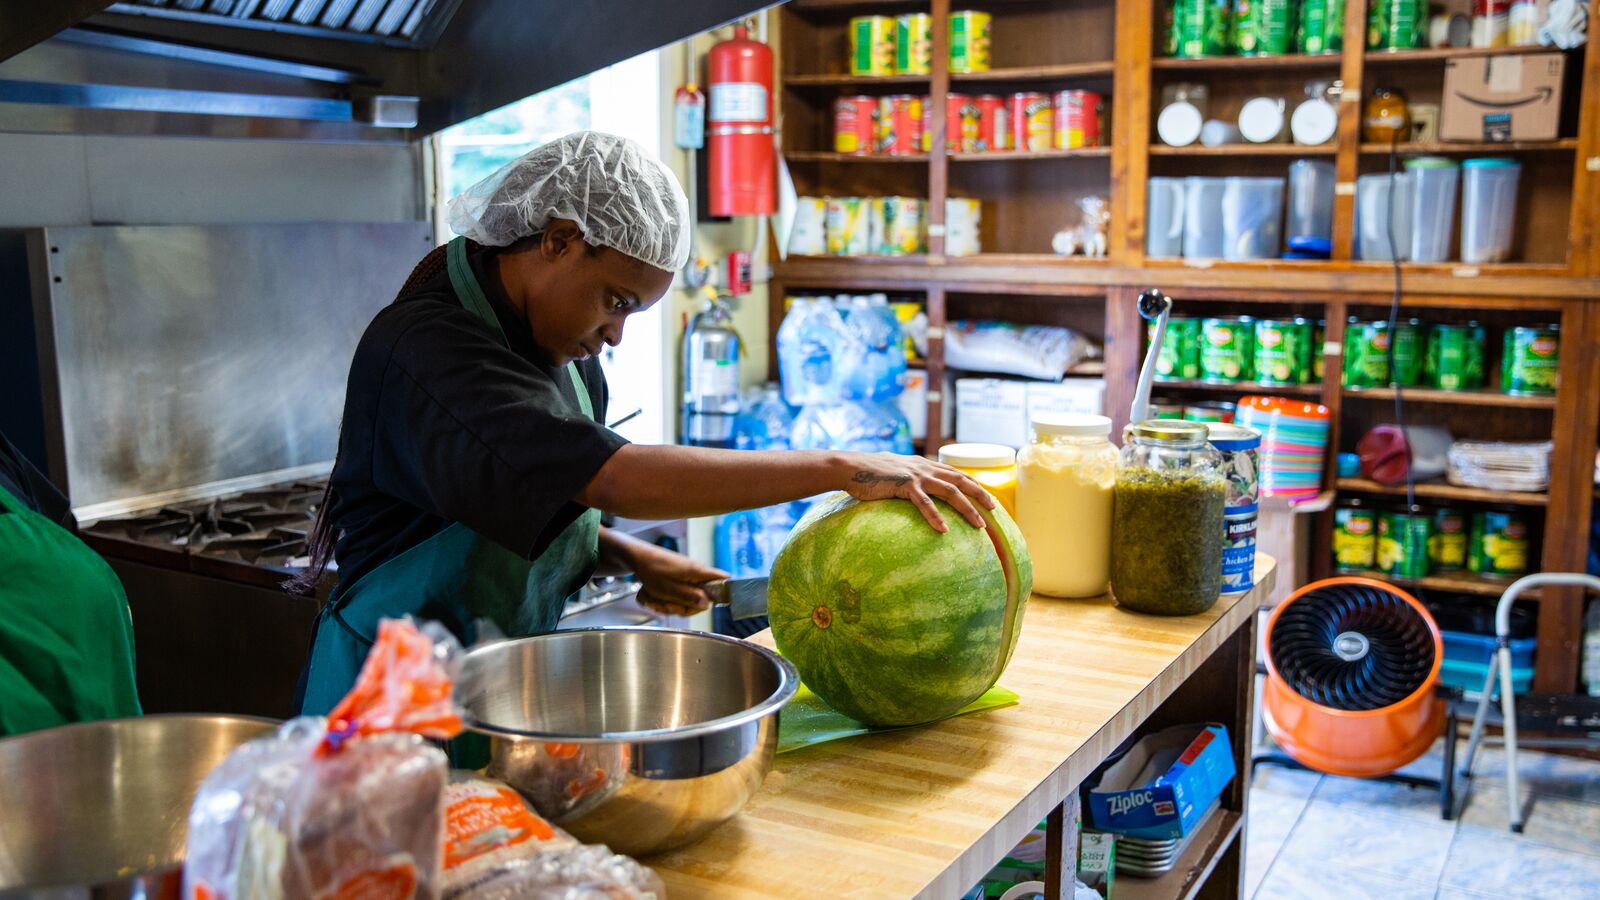 A food service worker prepares fresh, healthy fruit for children in a school